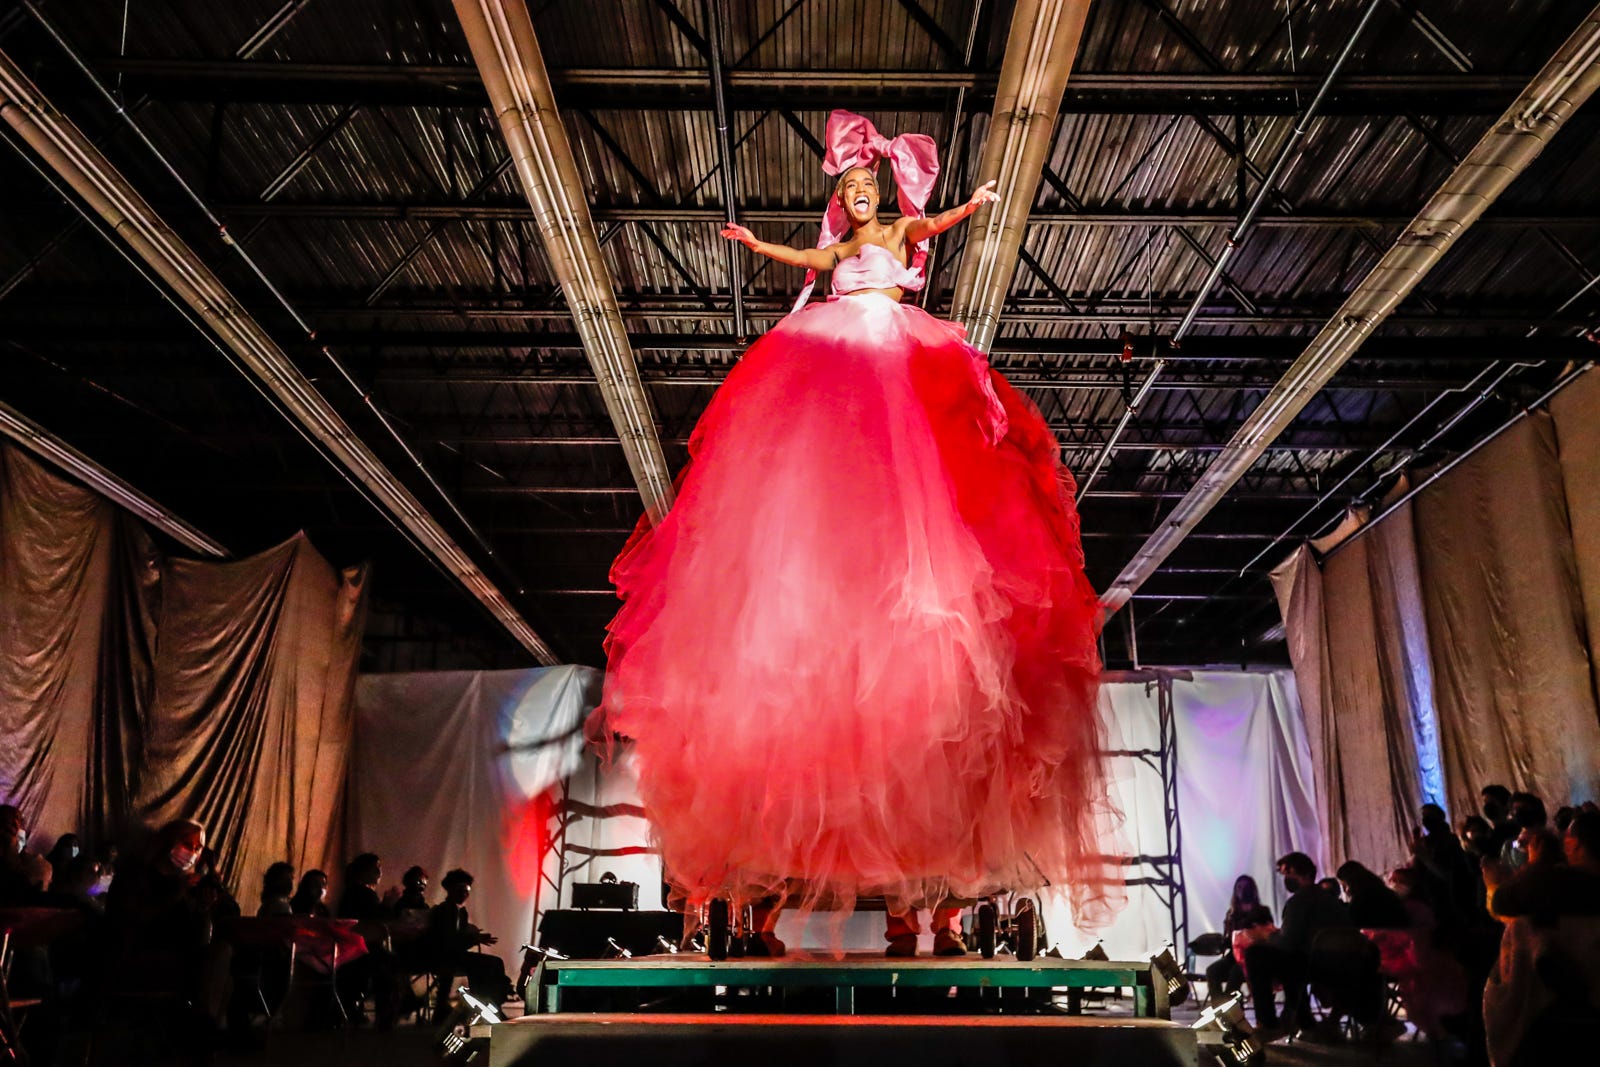 Event emcee Morgan Robinson-Gay rolls down the catwalk during the annual Herron Wearable Art Show on Thursday, Oct. 28, 2021, at the IUPUI Herron School of Art and Design Sculpture and ceramics building in Indianapolis.